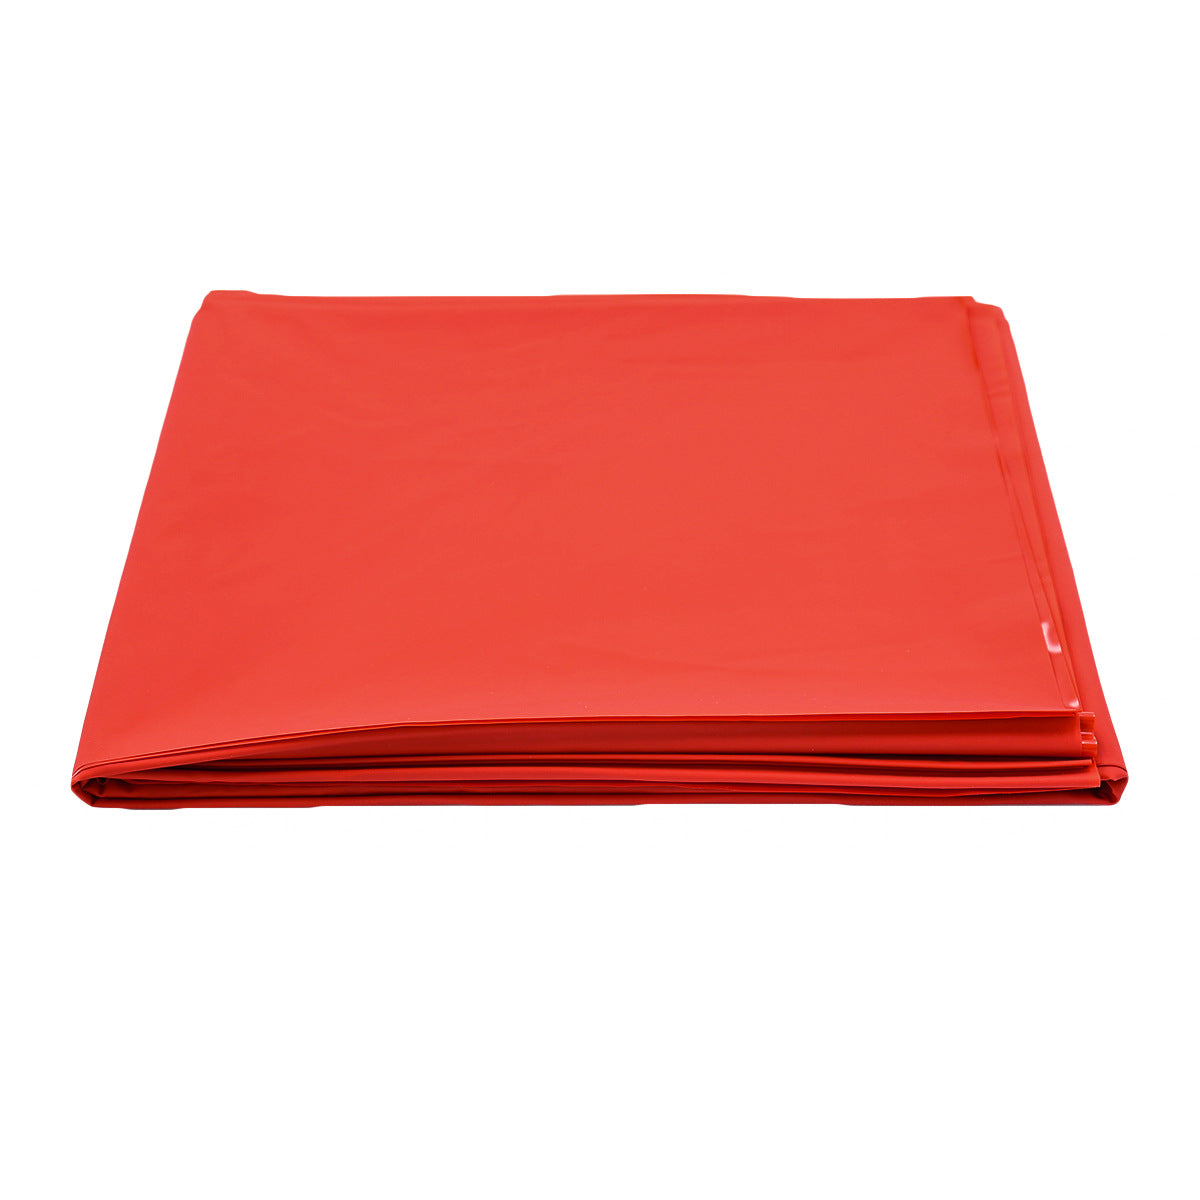 Reusable Waterproof Fitted Play Bed Sheets for Wet Game